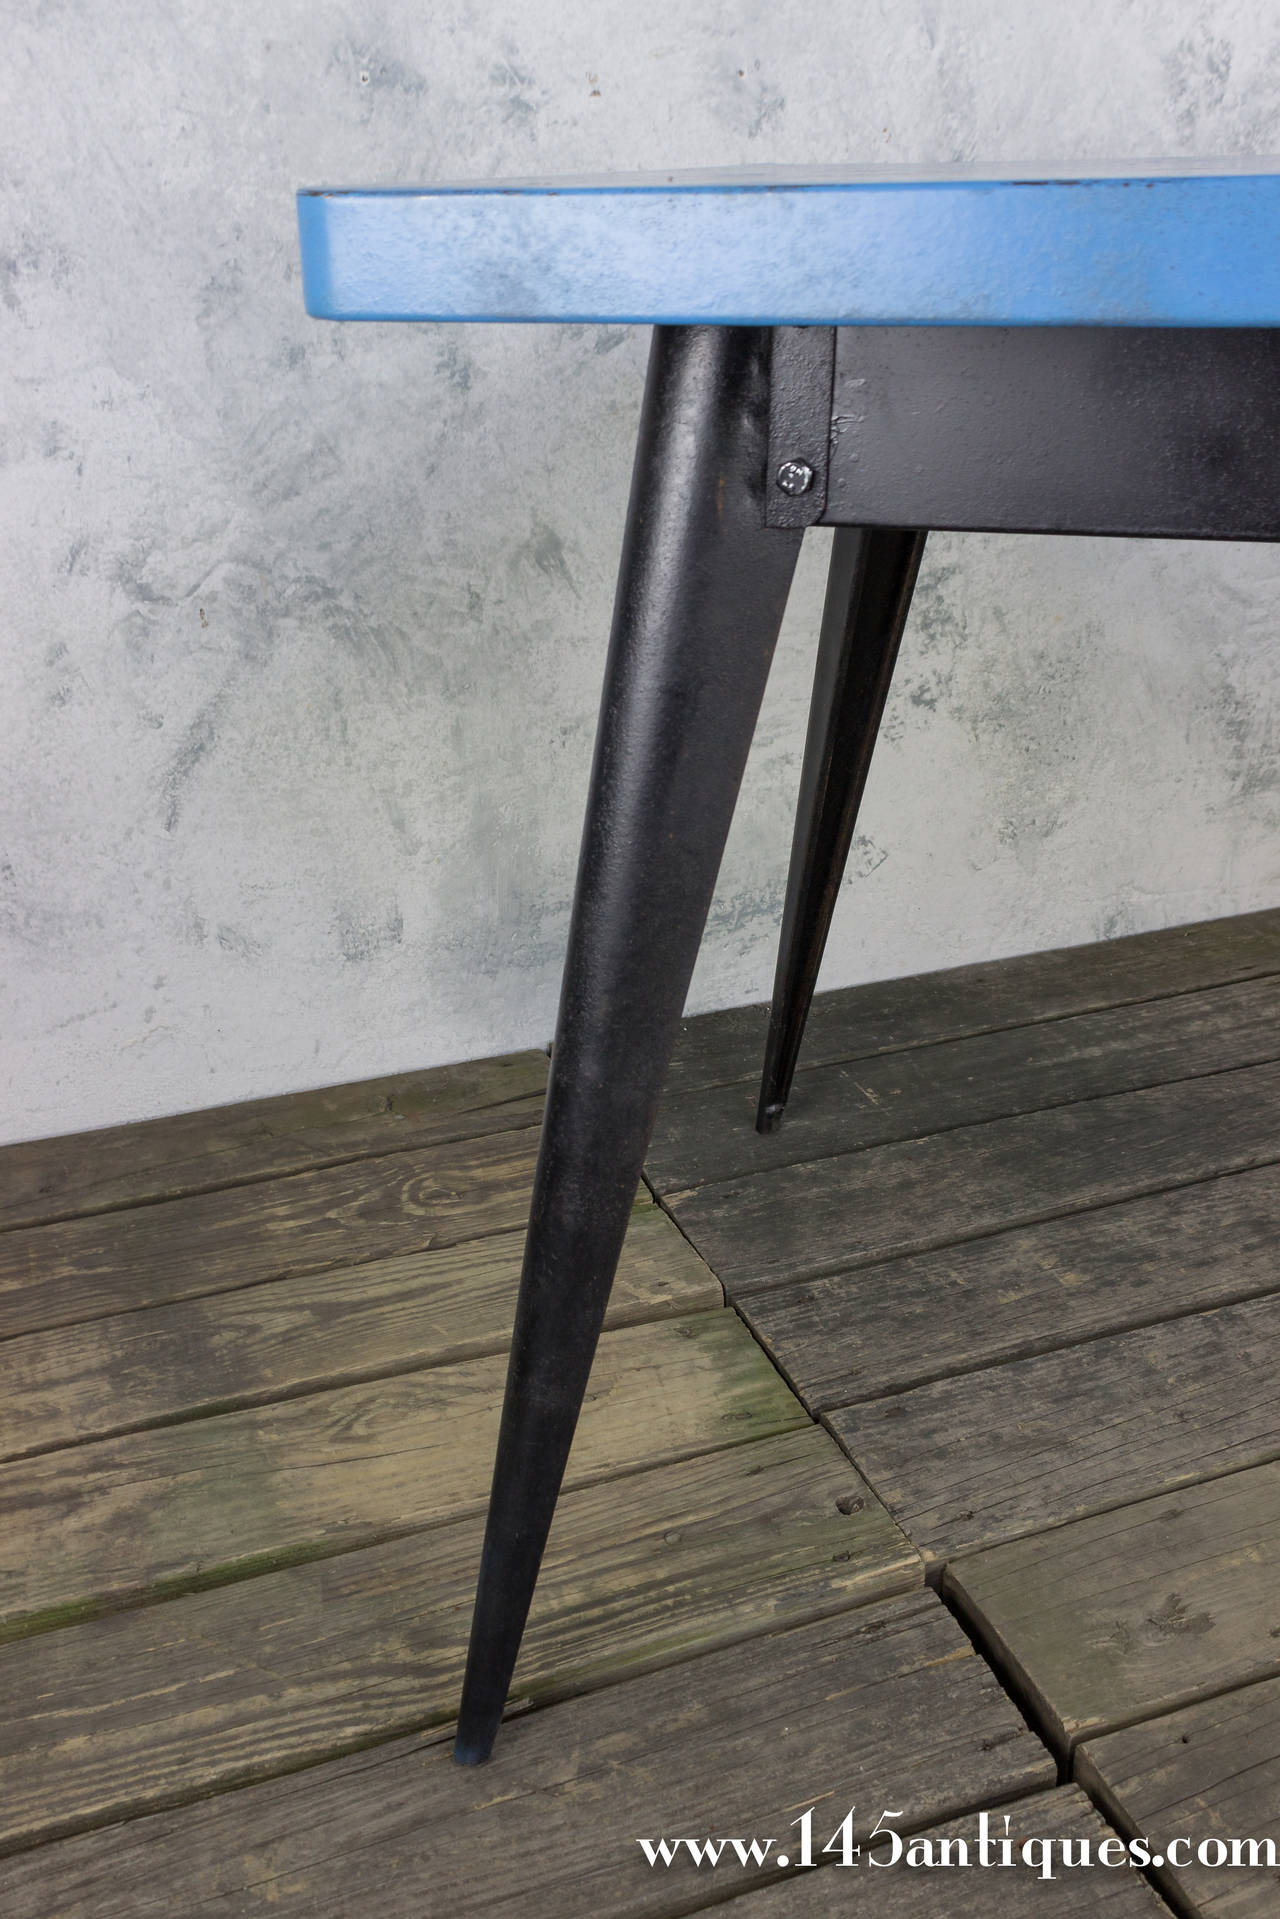 French metal table manufactured by the Tolix company, circa 1950. This table has a black painted base and a blue metal top.